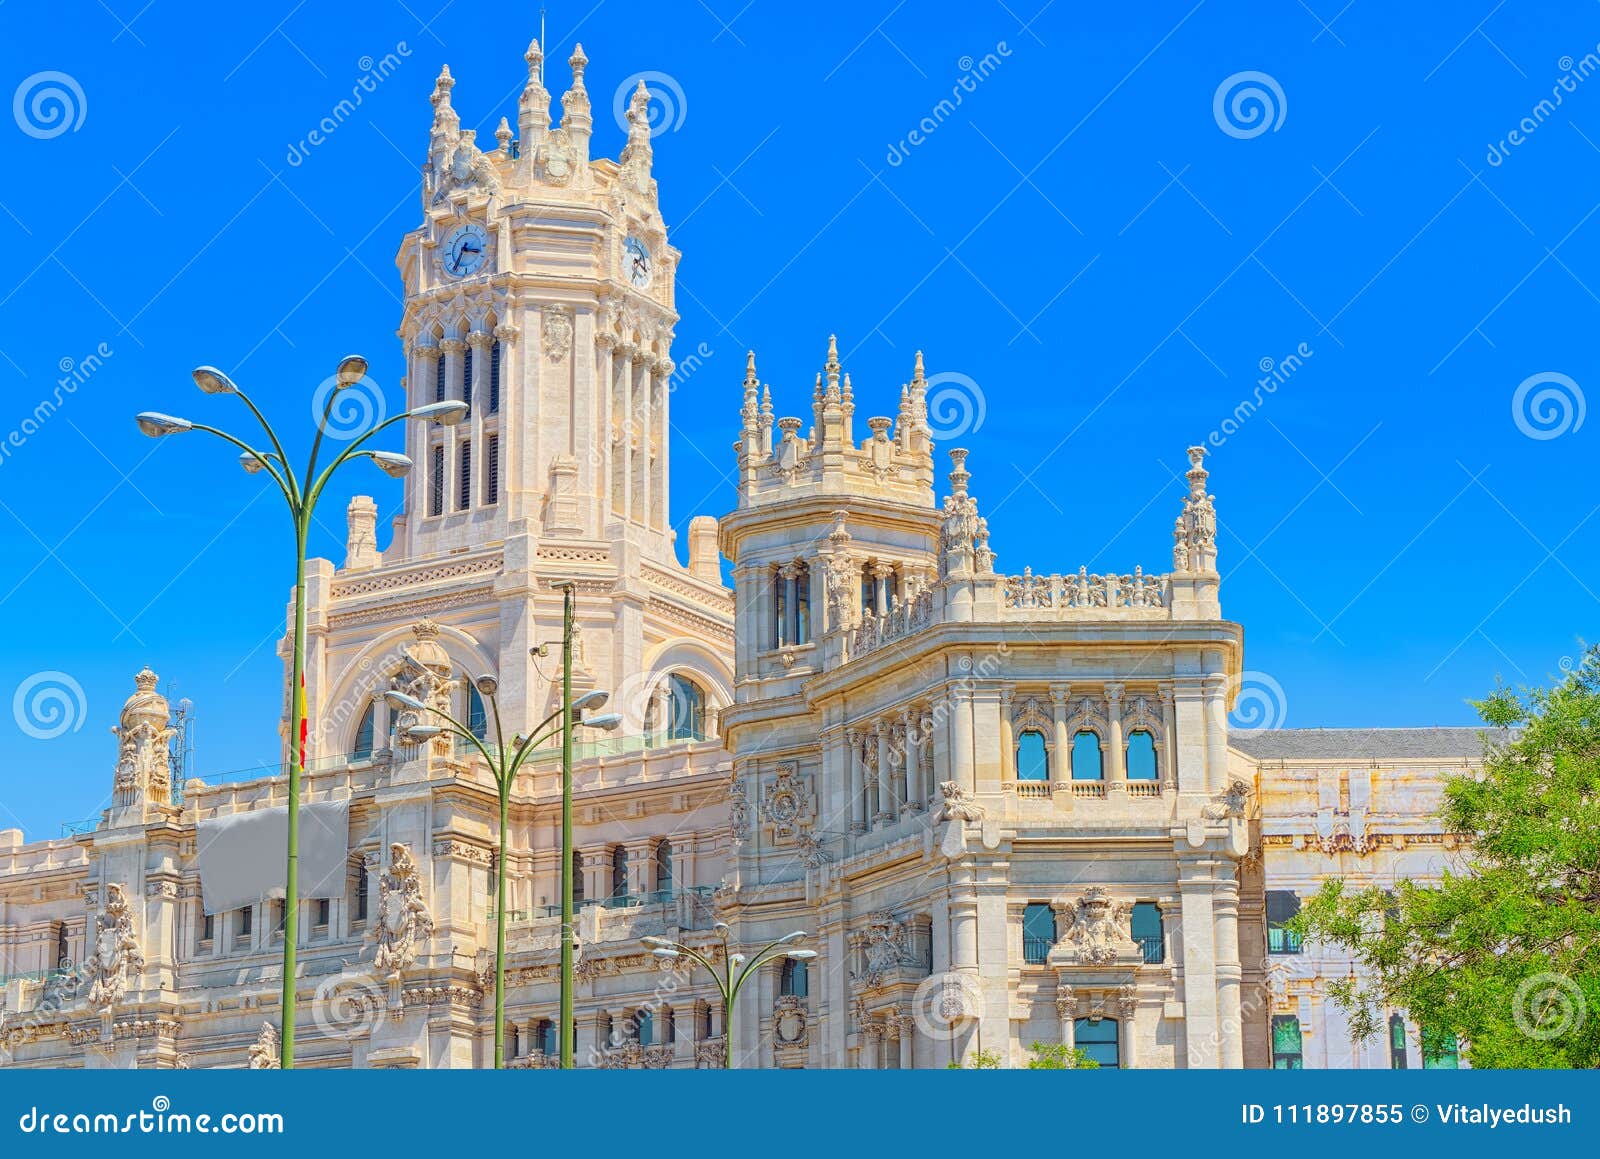 cibeles center or palace of communication, culture and citizens